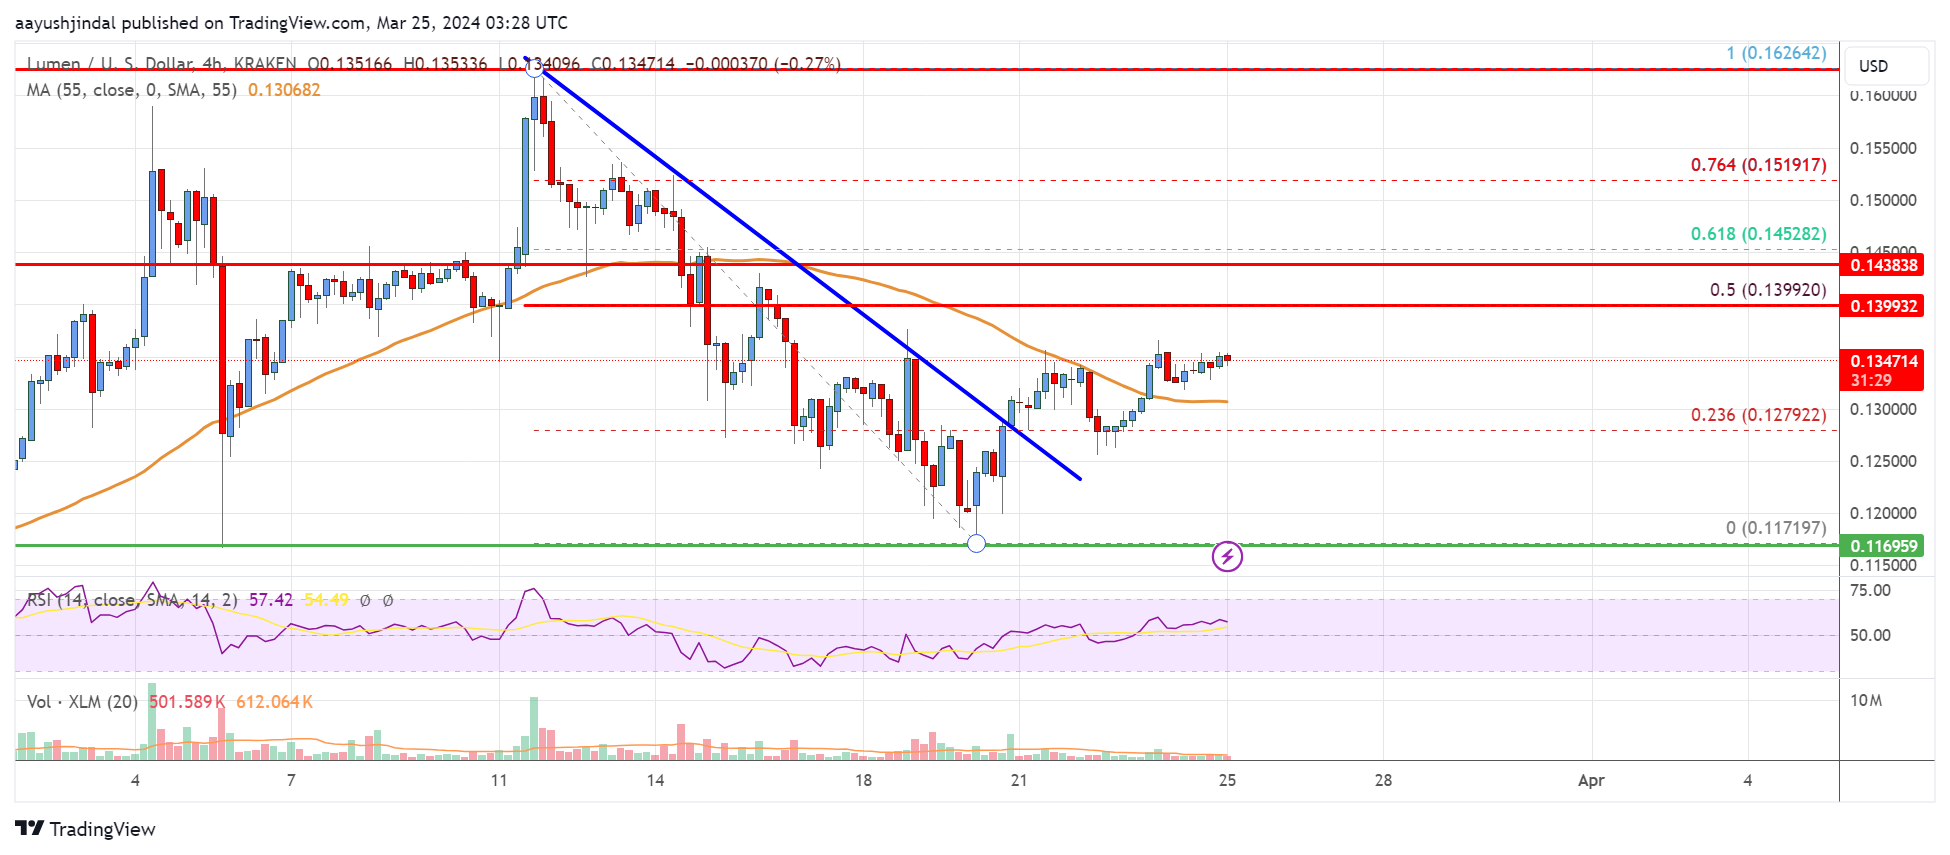 Stellar Lumen (XLM) Price Could Accelerate To $0.16, Key Support Intact